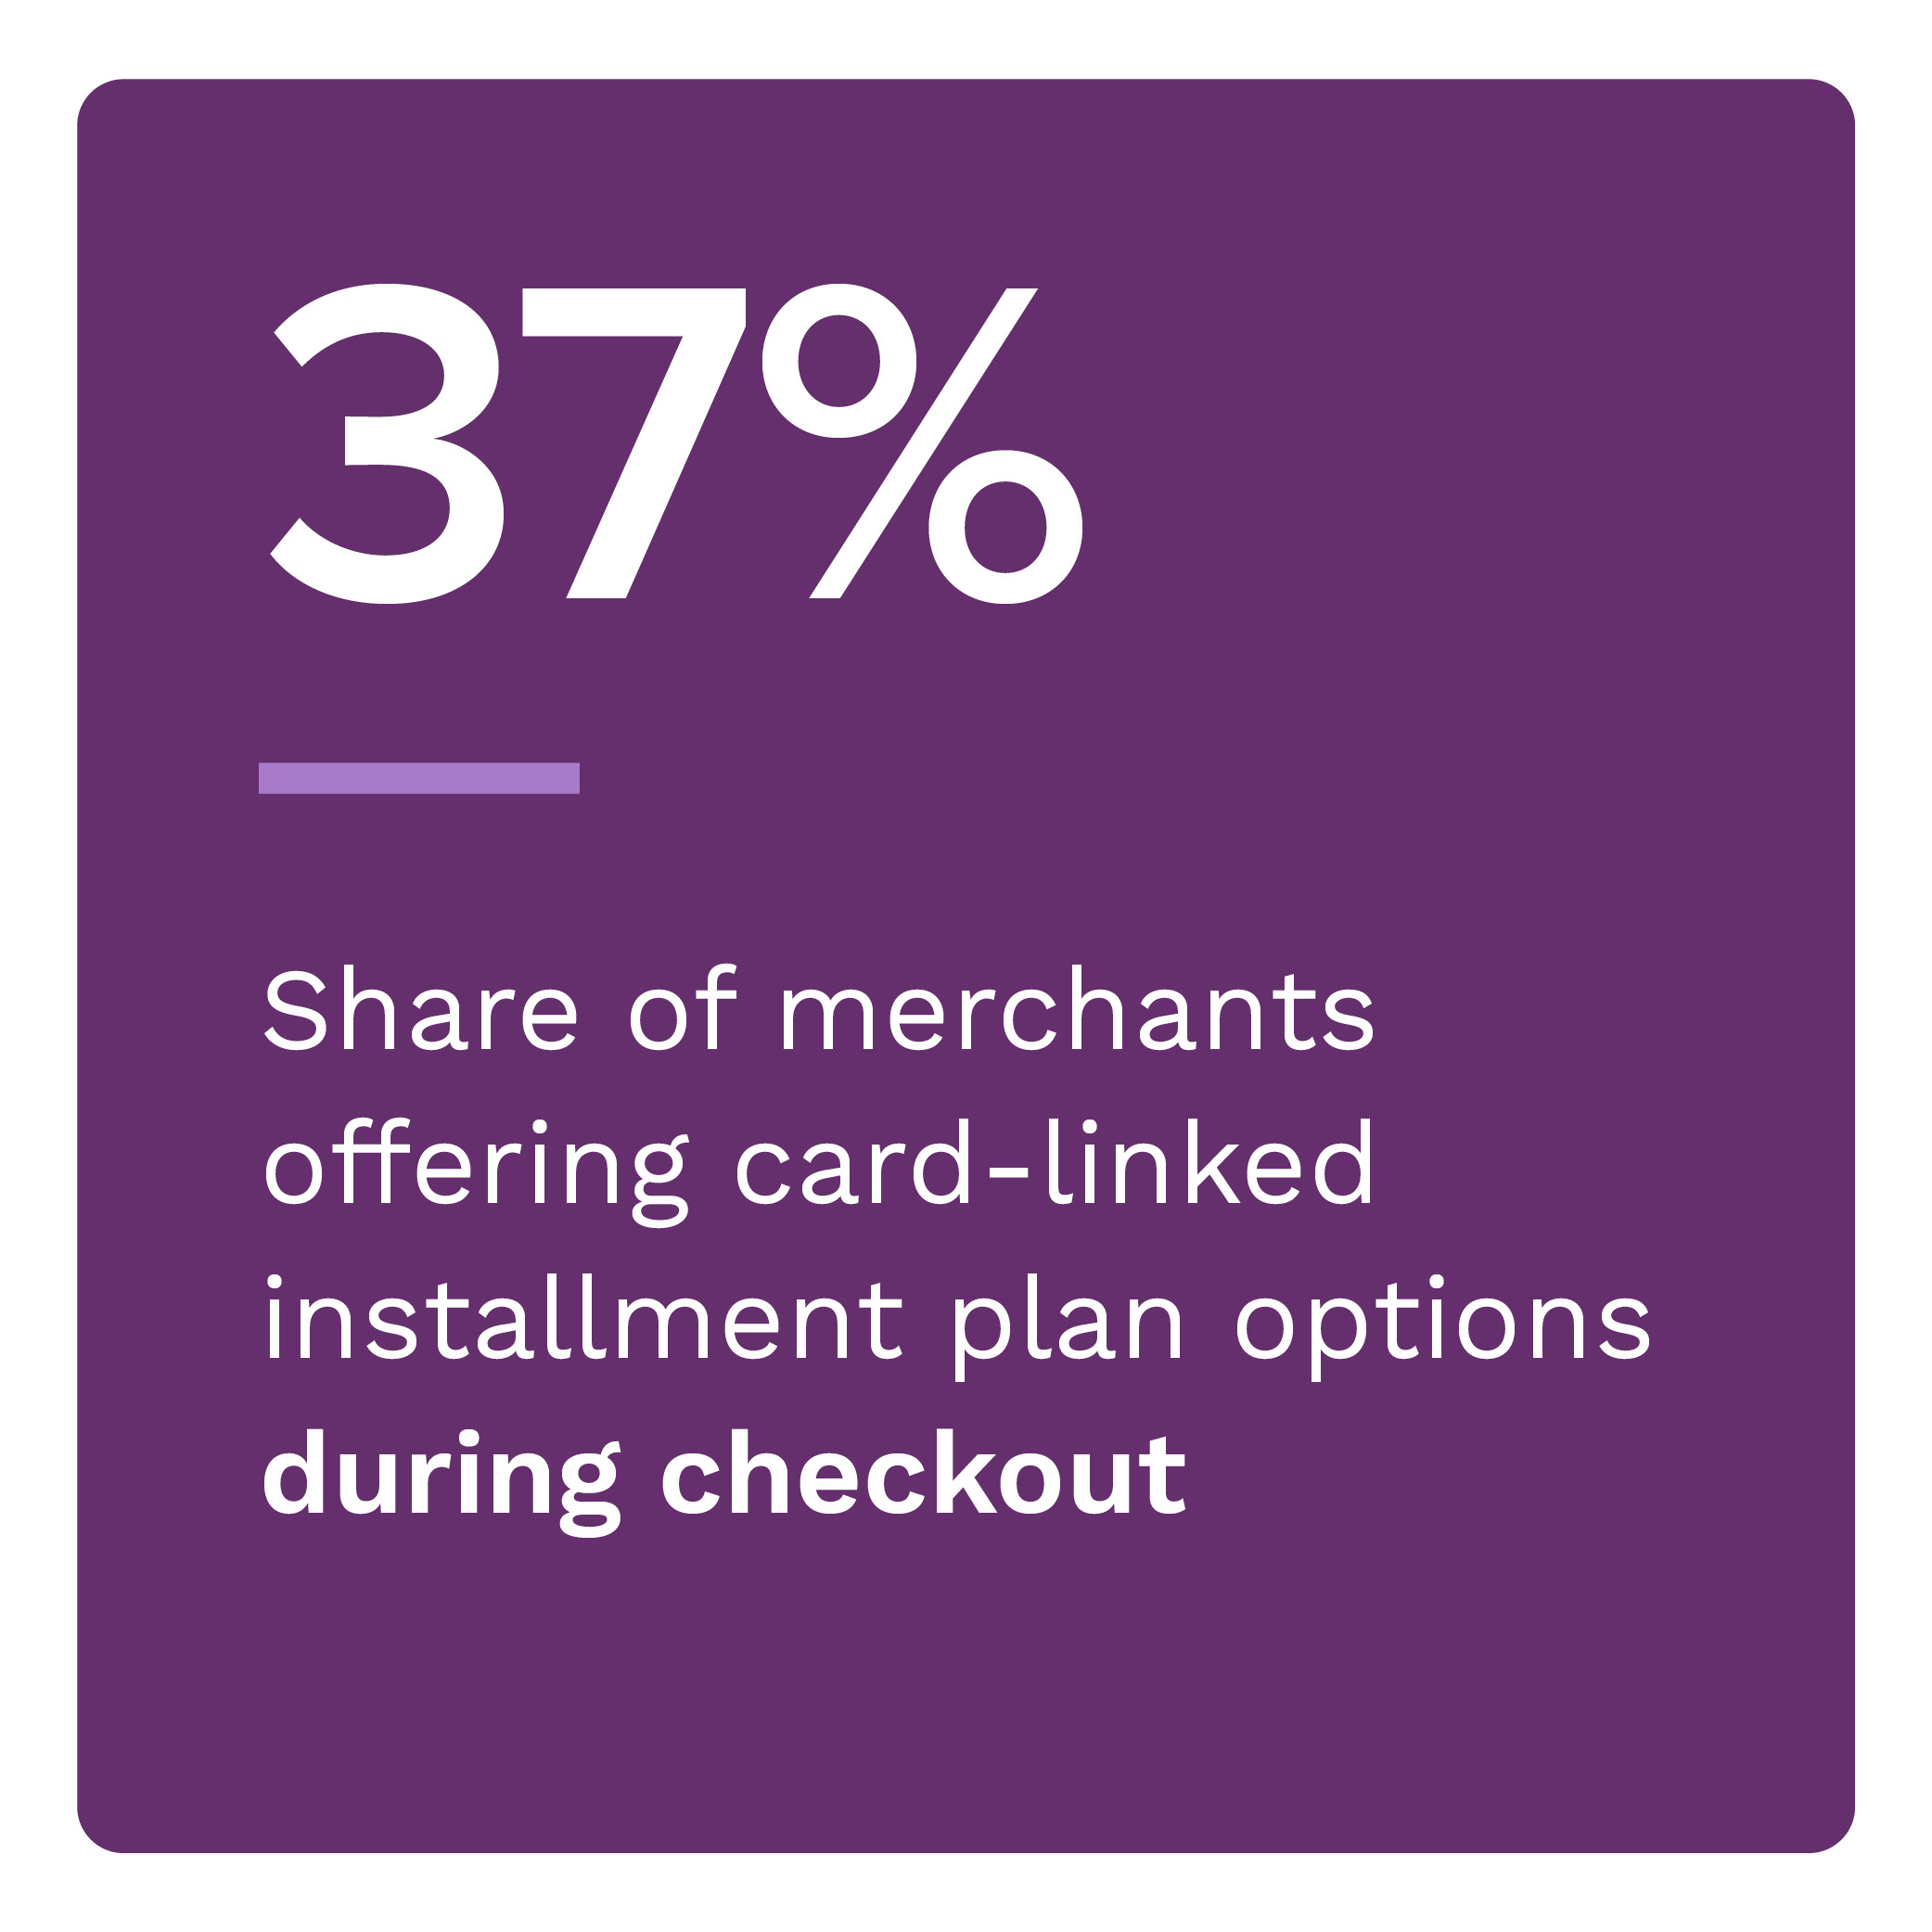 37%: Share of merchants offering card-linked installment plan options during checkout